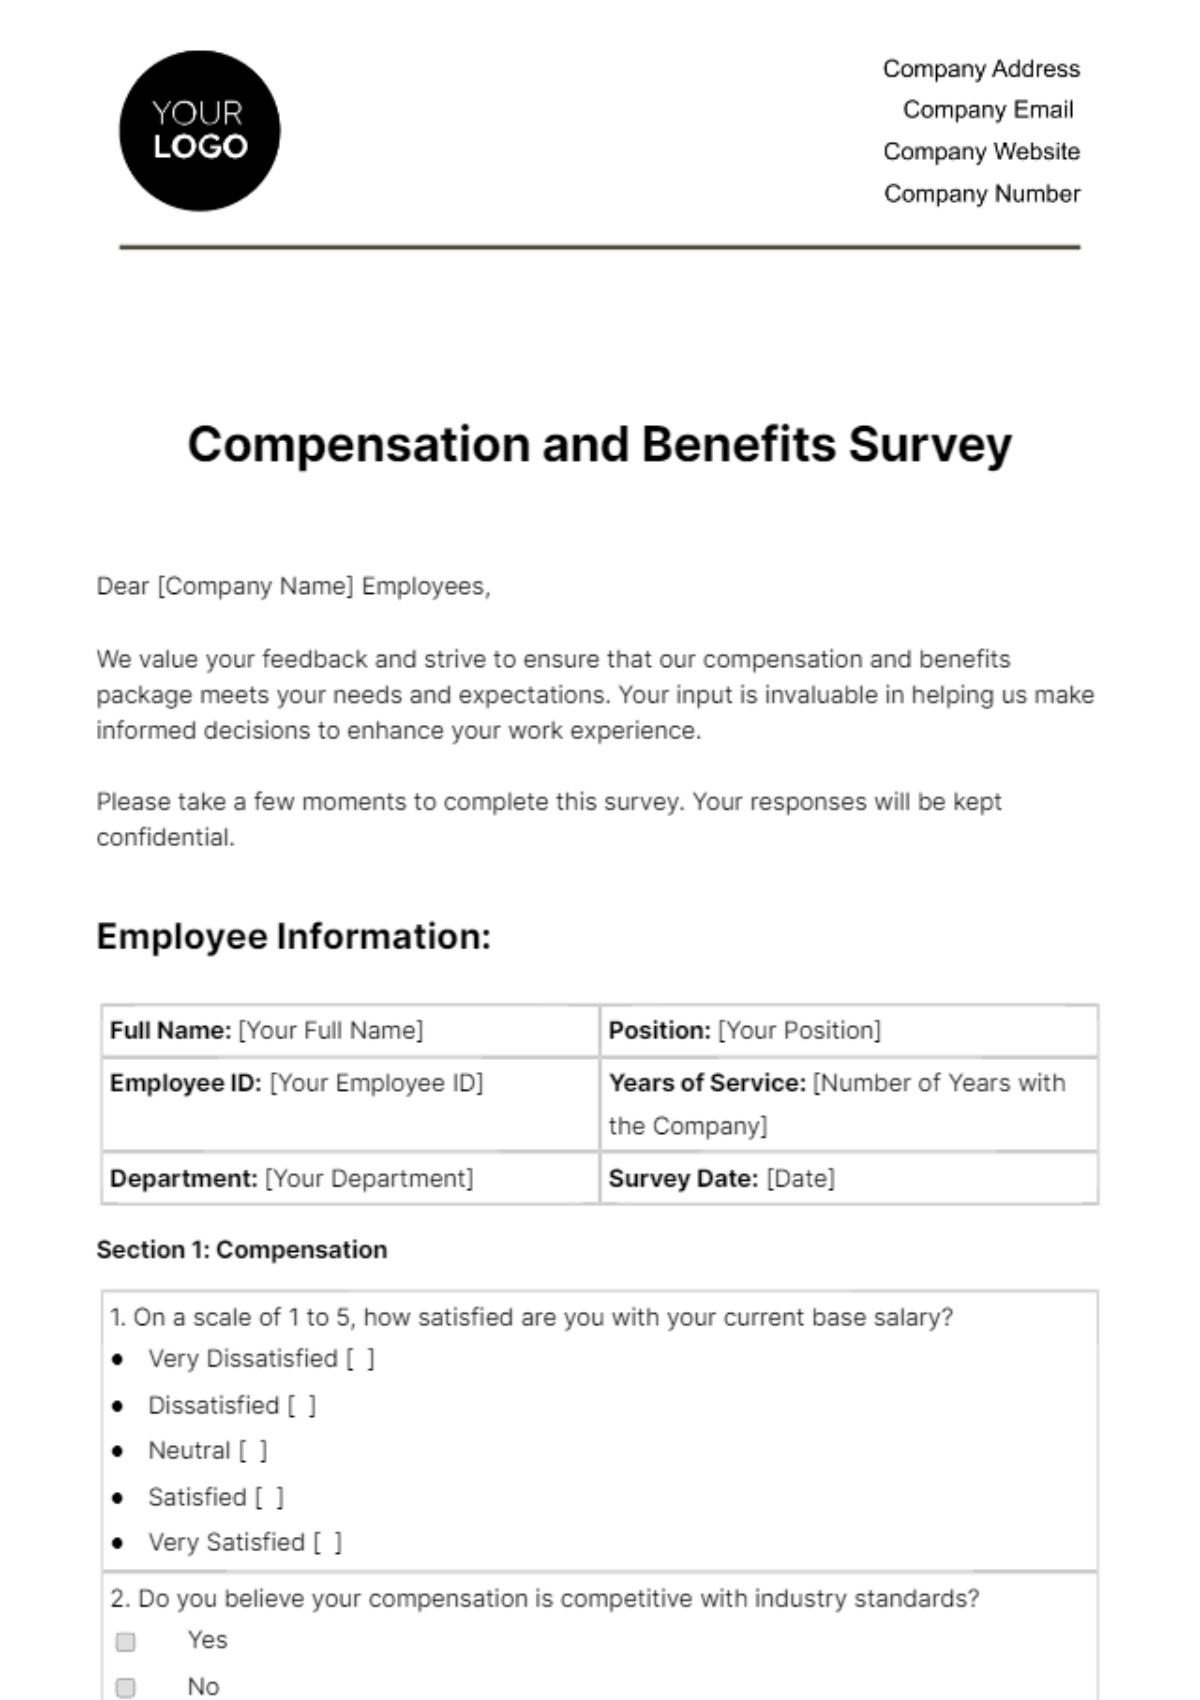 Free Compensation and Benefits Survey HR Template